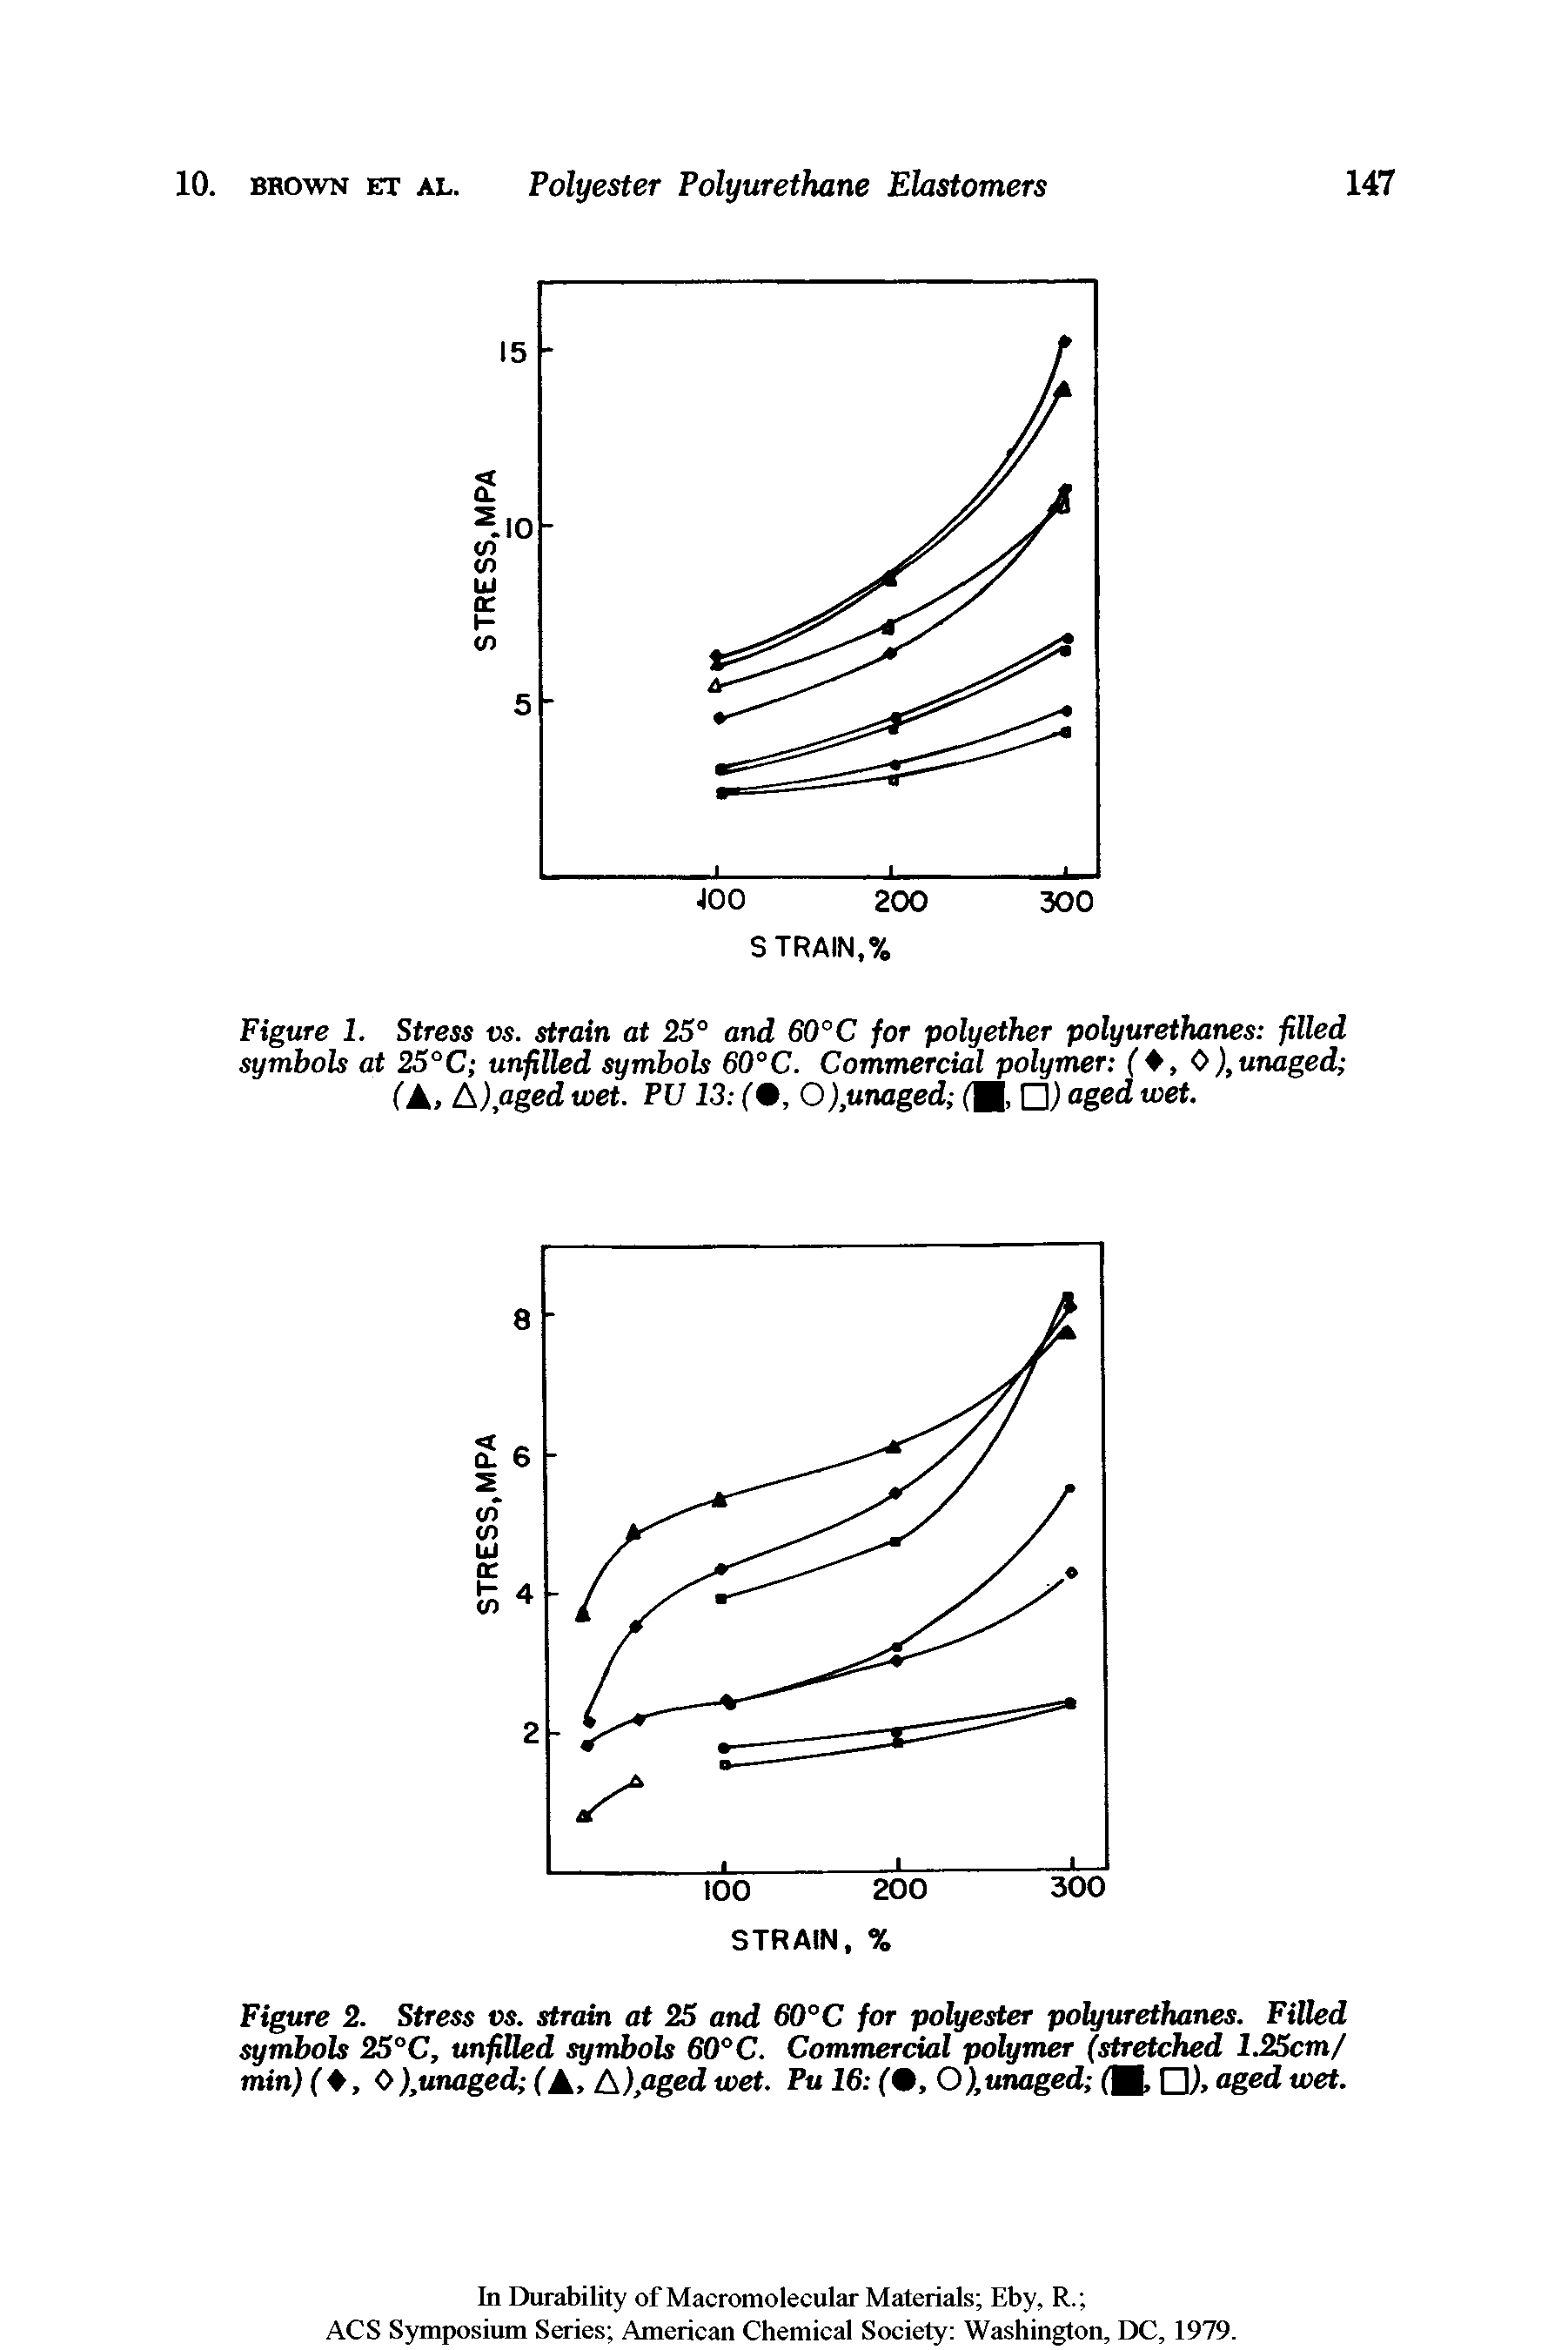 Figure 2. Stress vs. strain at 25 and 60°C for polyester polyurethanes. Filled symbols 25°C, unfilled symbols 60°C. Commercial polymer (stretched 1.25cm/ min) f , 0 ),unaged (A> A),aged wet. Pu 16 ( , 0),unaged ( , aged wet.